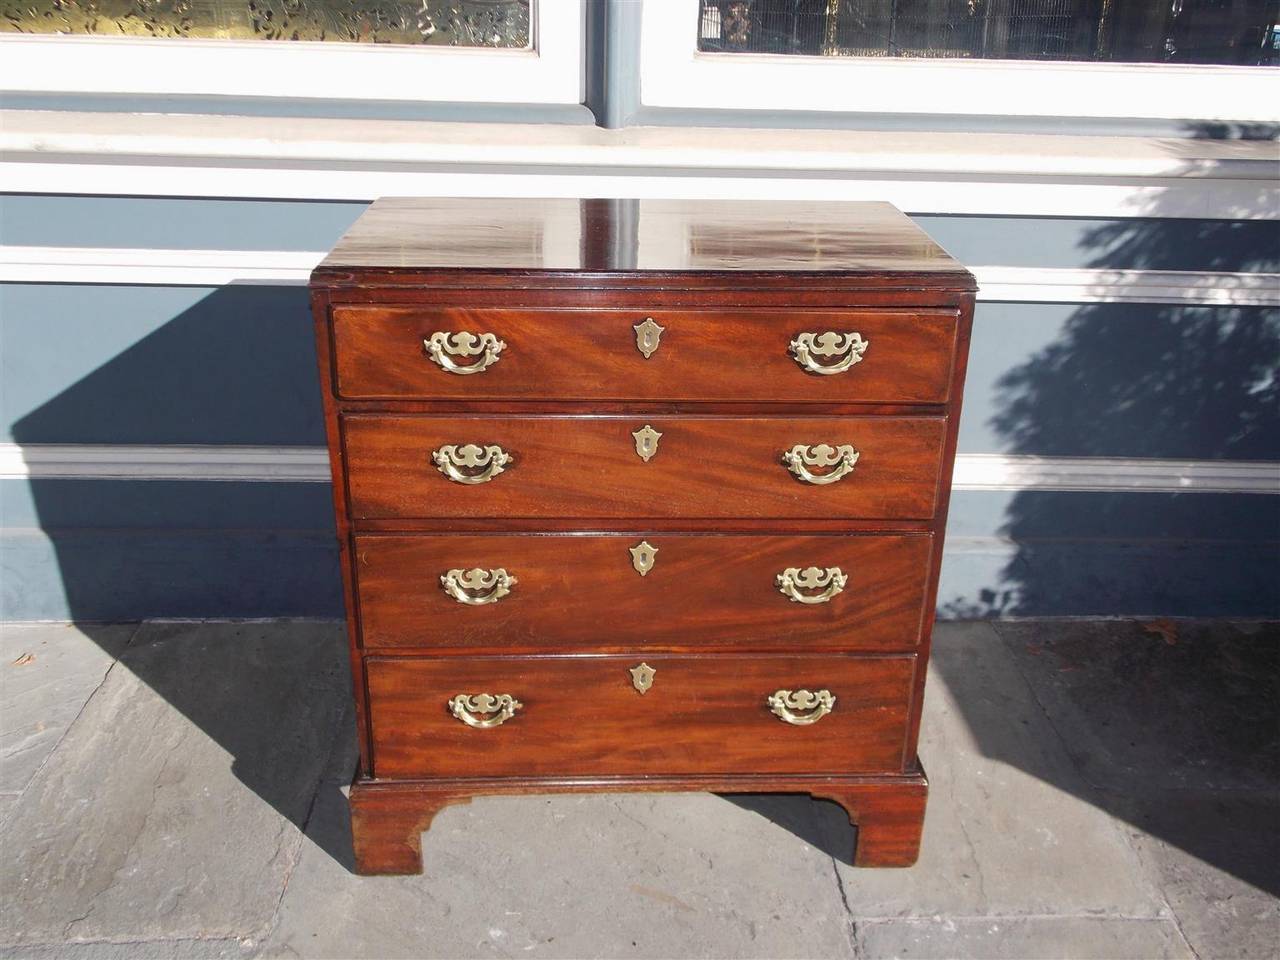 English Chippendale mahogany graduated four-drawer bachelors chest with original brasses, side handles and bracket feet, Late 18th century.